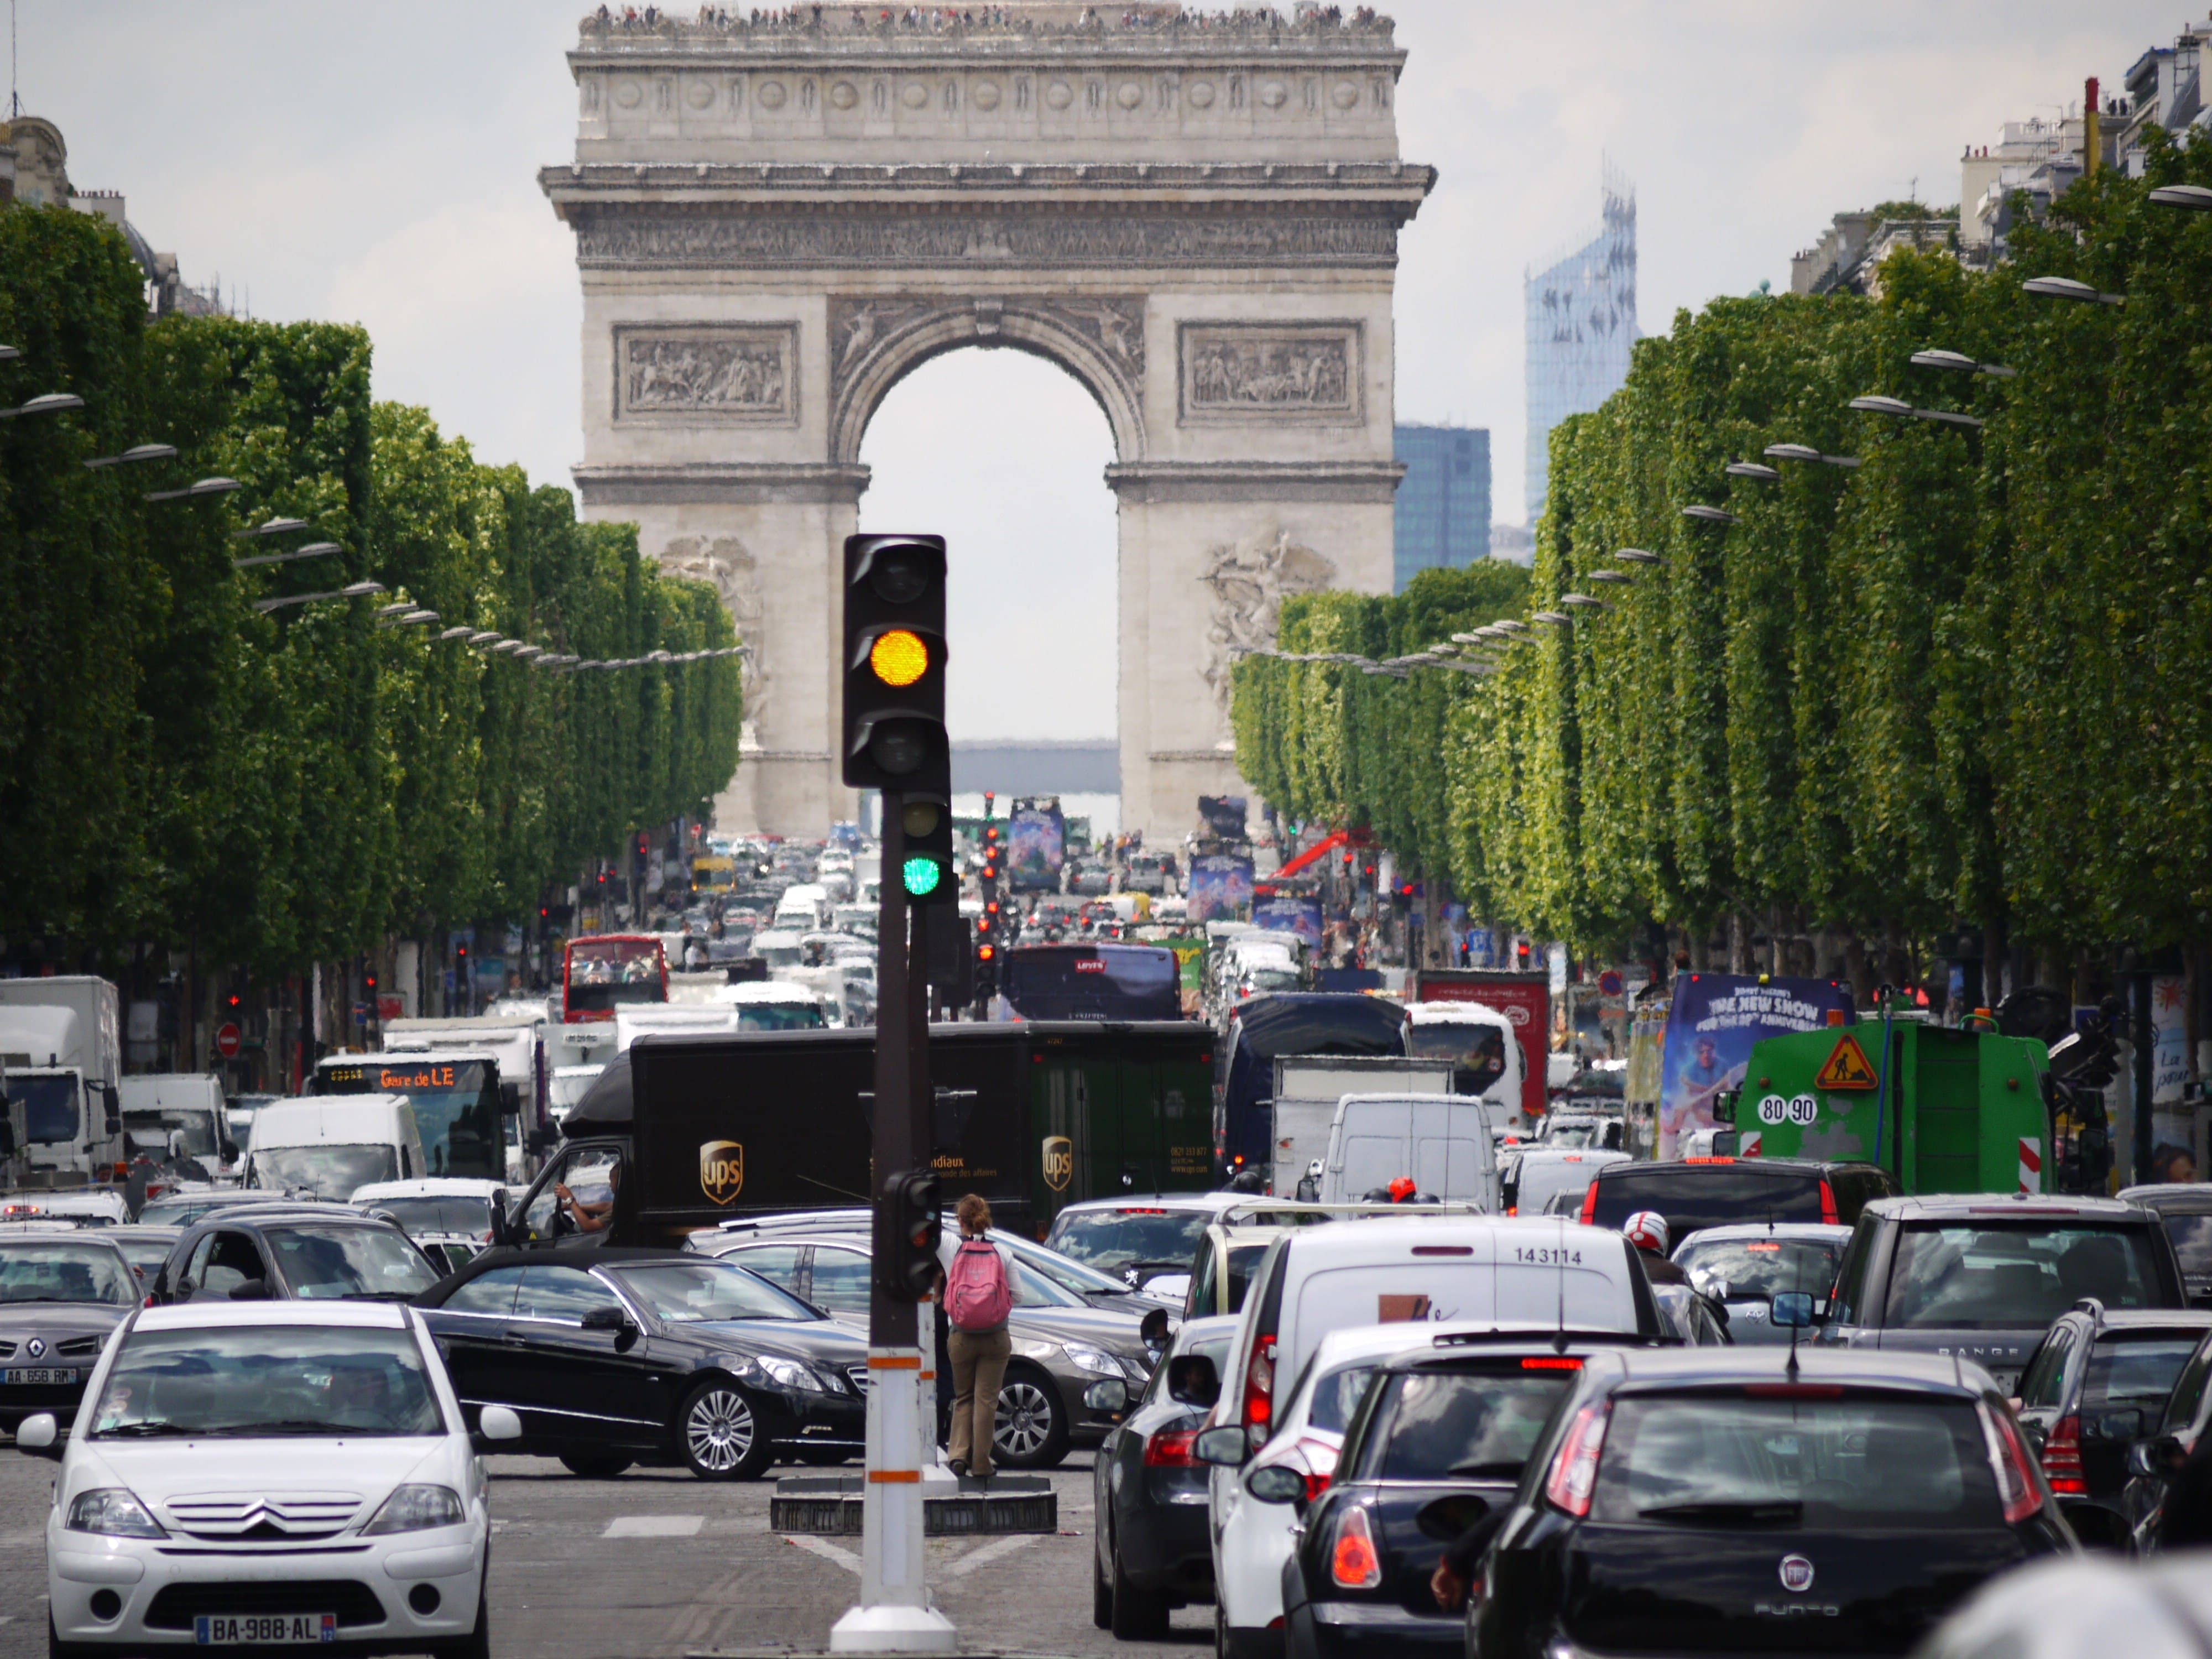 Congestion in front of the Arc de Triomphe in Paris, France. A traffic light is orange